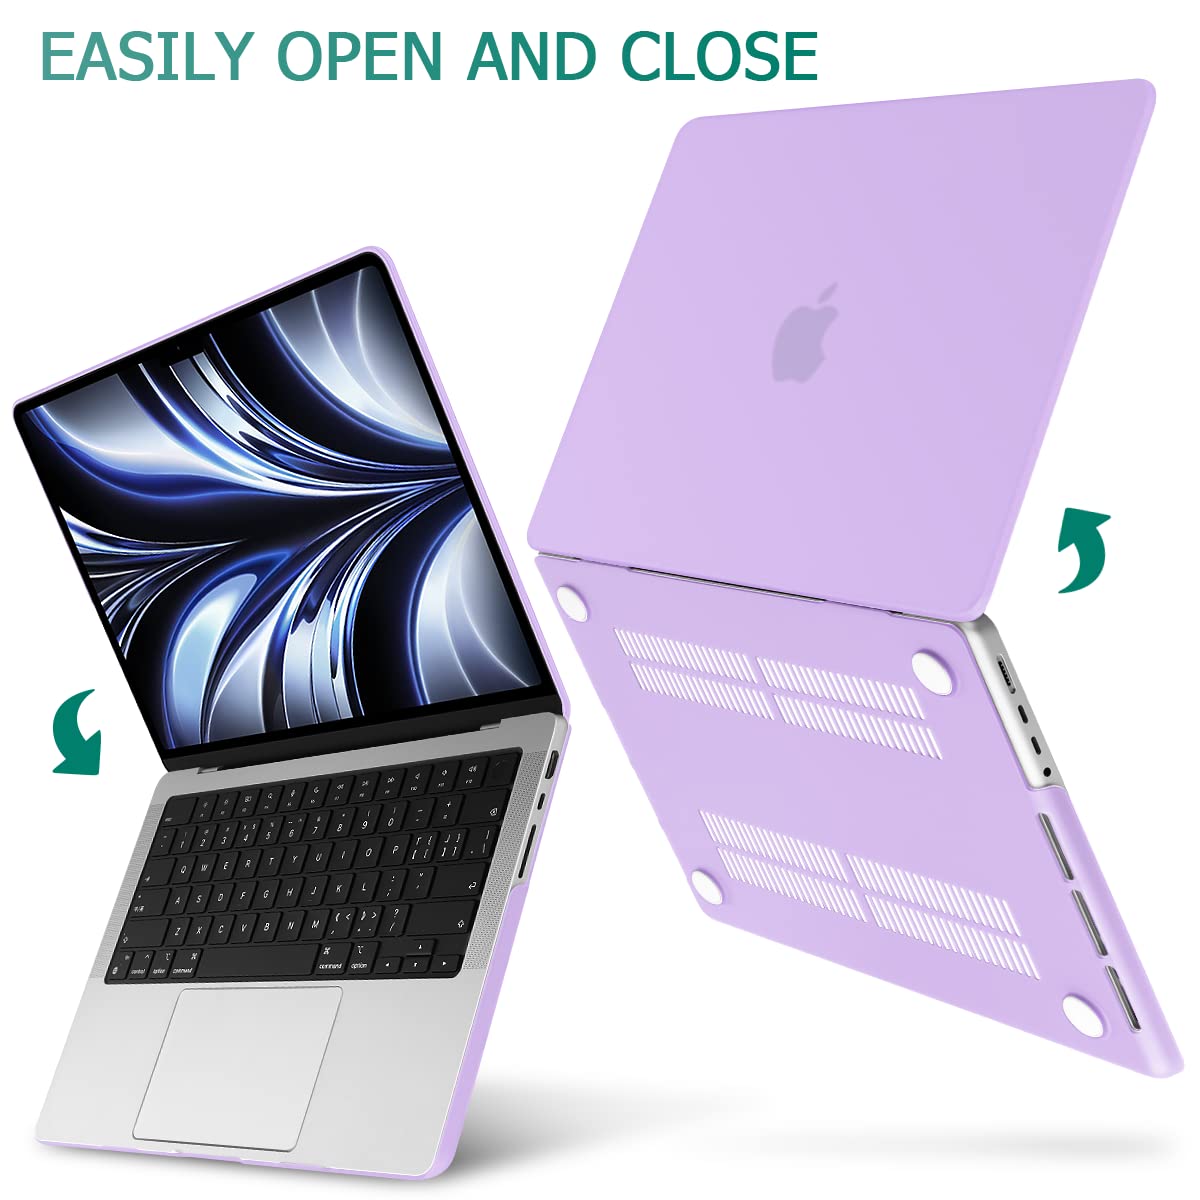 Suitable for  MacBook Pro 14 Max Inch Case 2023 2022 2021 M2 A2779 M1 A2442 Hardshell Case Keyboard Cover Purple